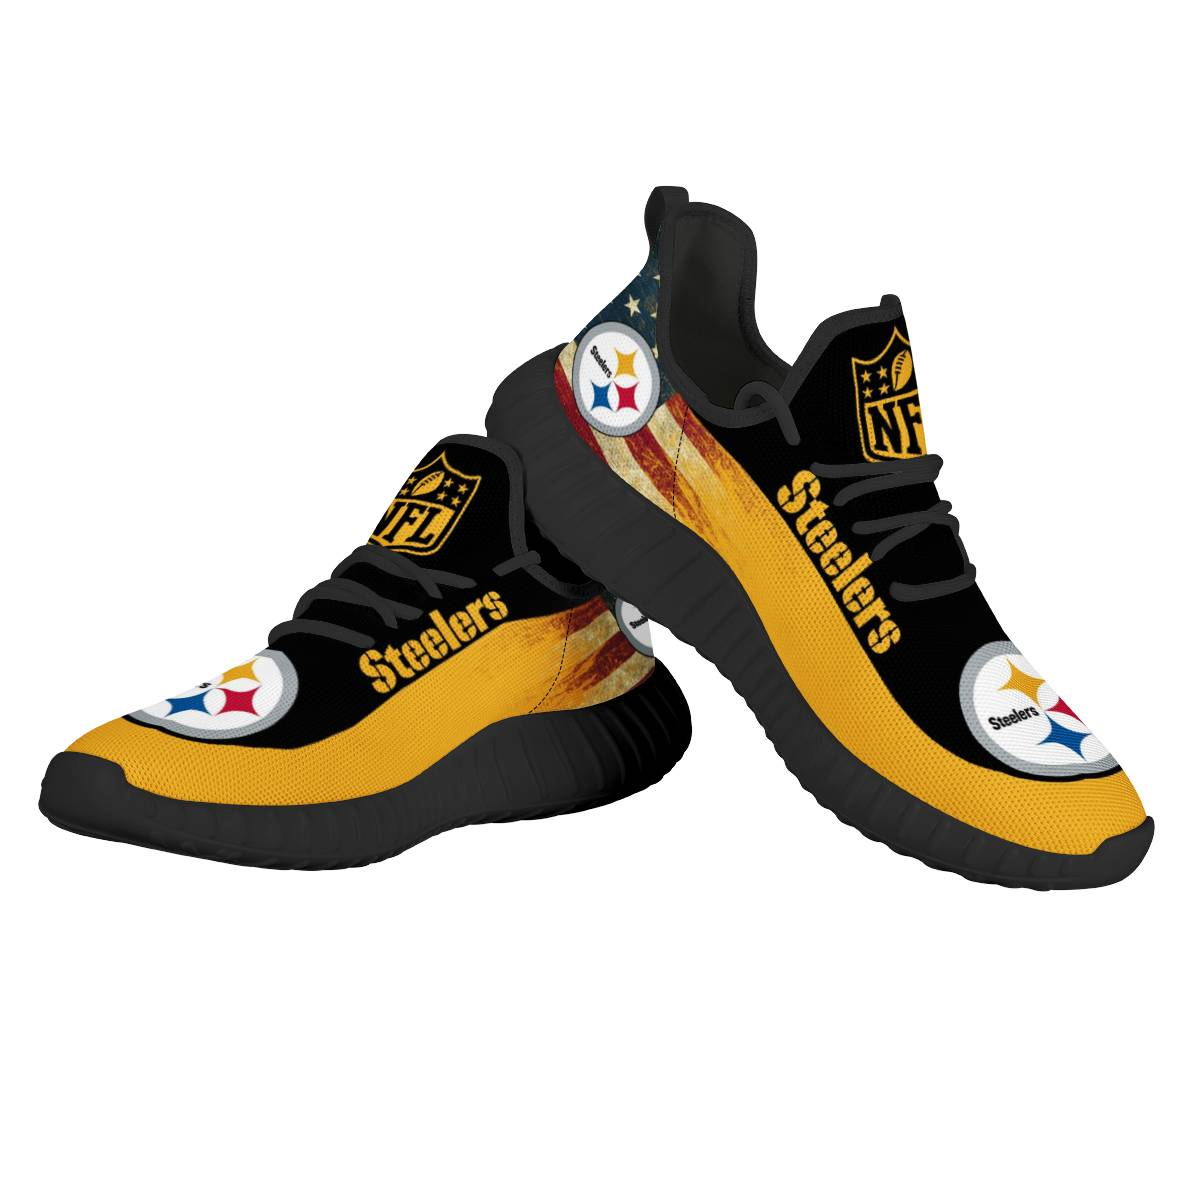 Men's NFL Pittsburgh Steelers Mesh Knit Sneakers/Shoes 006